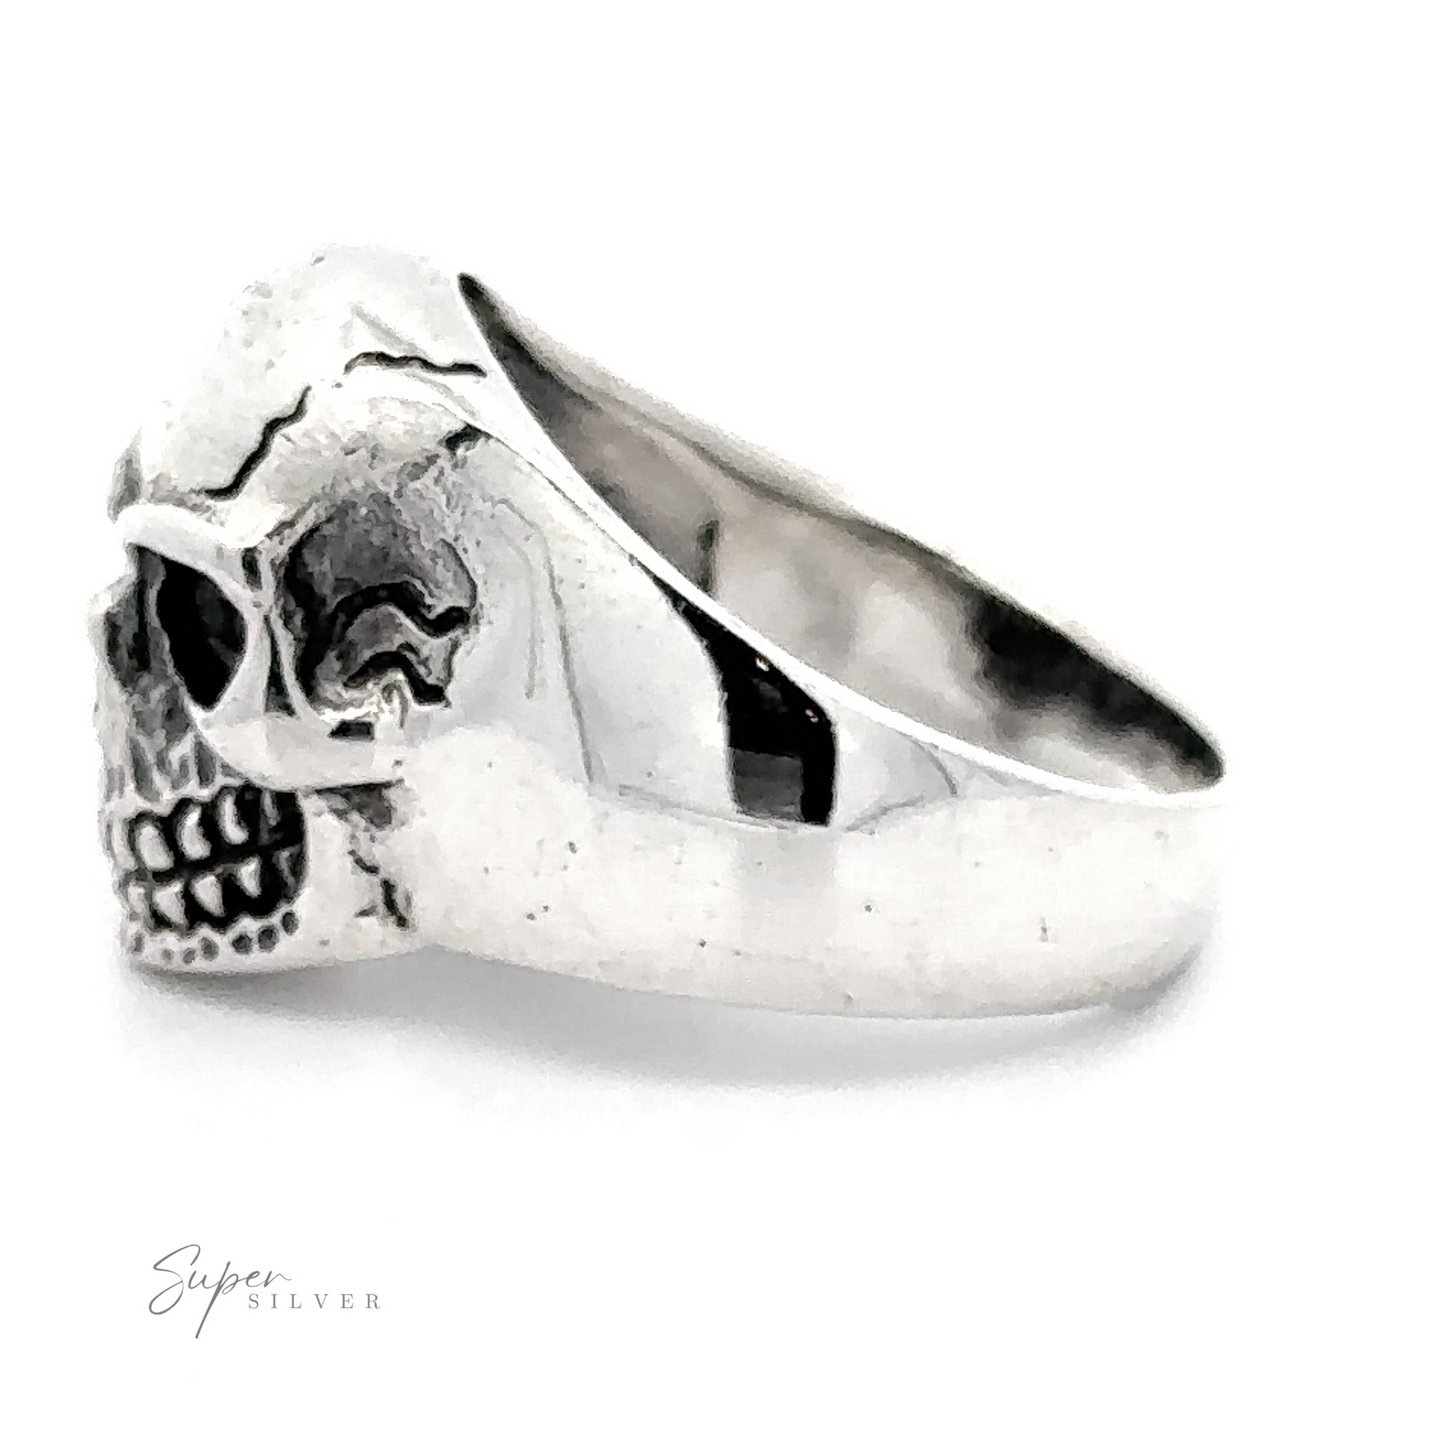 A bold accessory, this Detailed Veined Skull Statement Ring features a detailed skull design, viewed from the front and slightly to the right. Crafted in .925 Sterling Silver, the polished band bears the text "Super Silver" in the lower left corner.